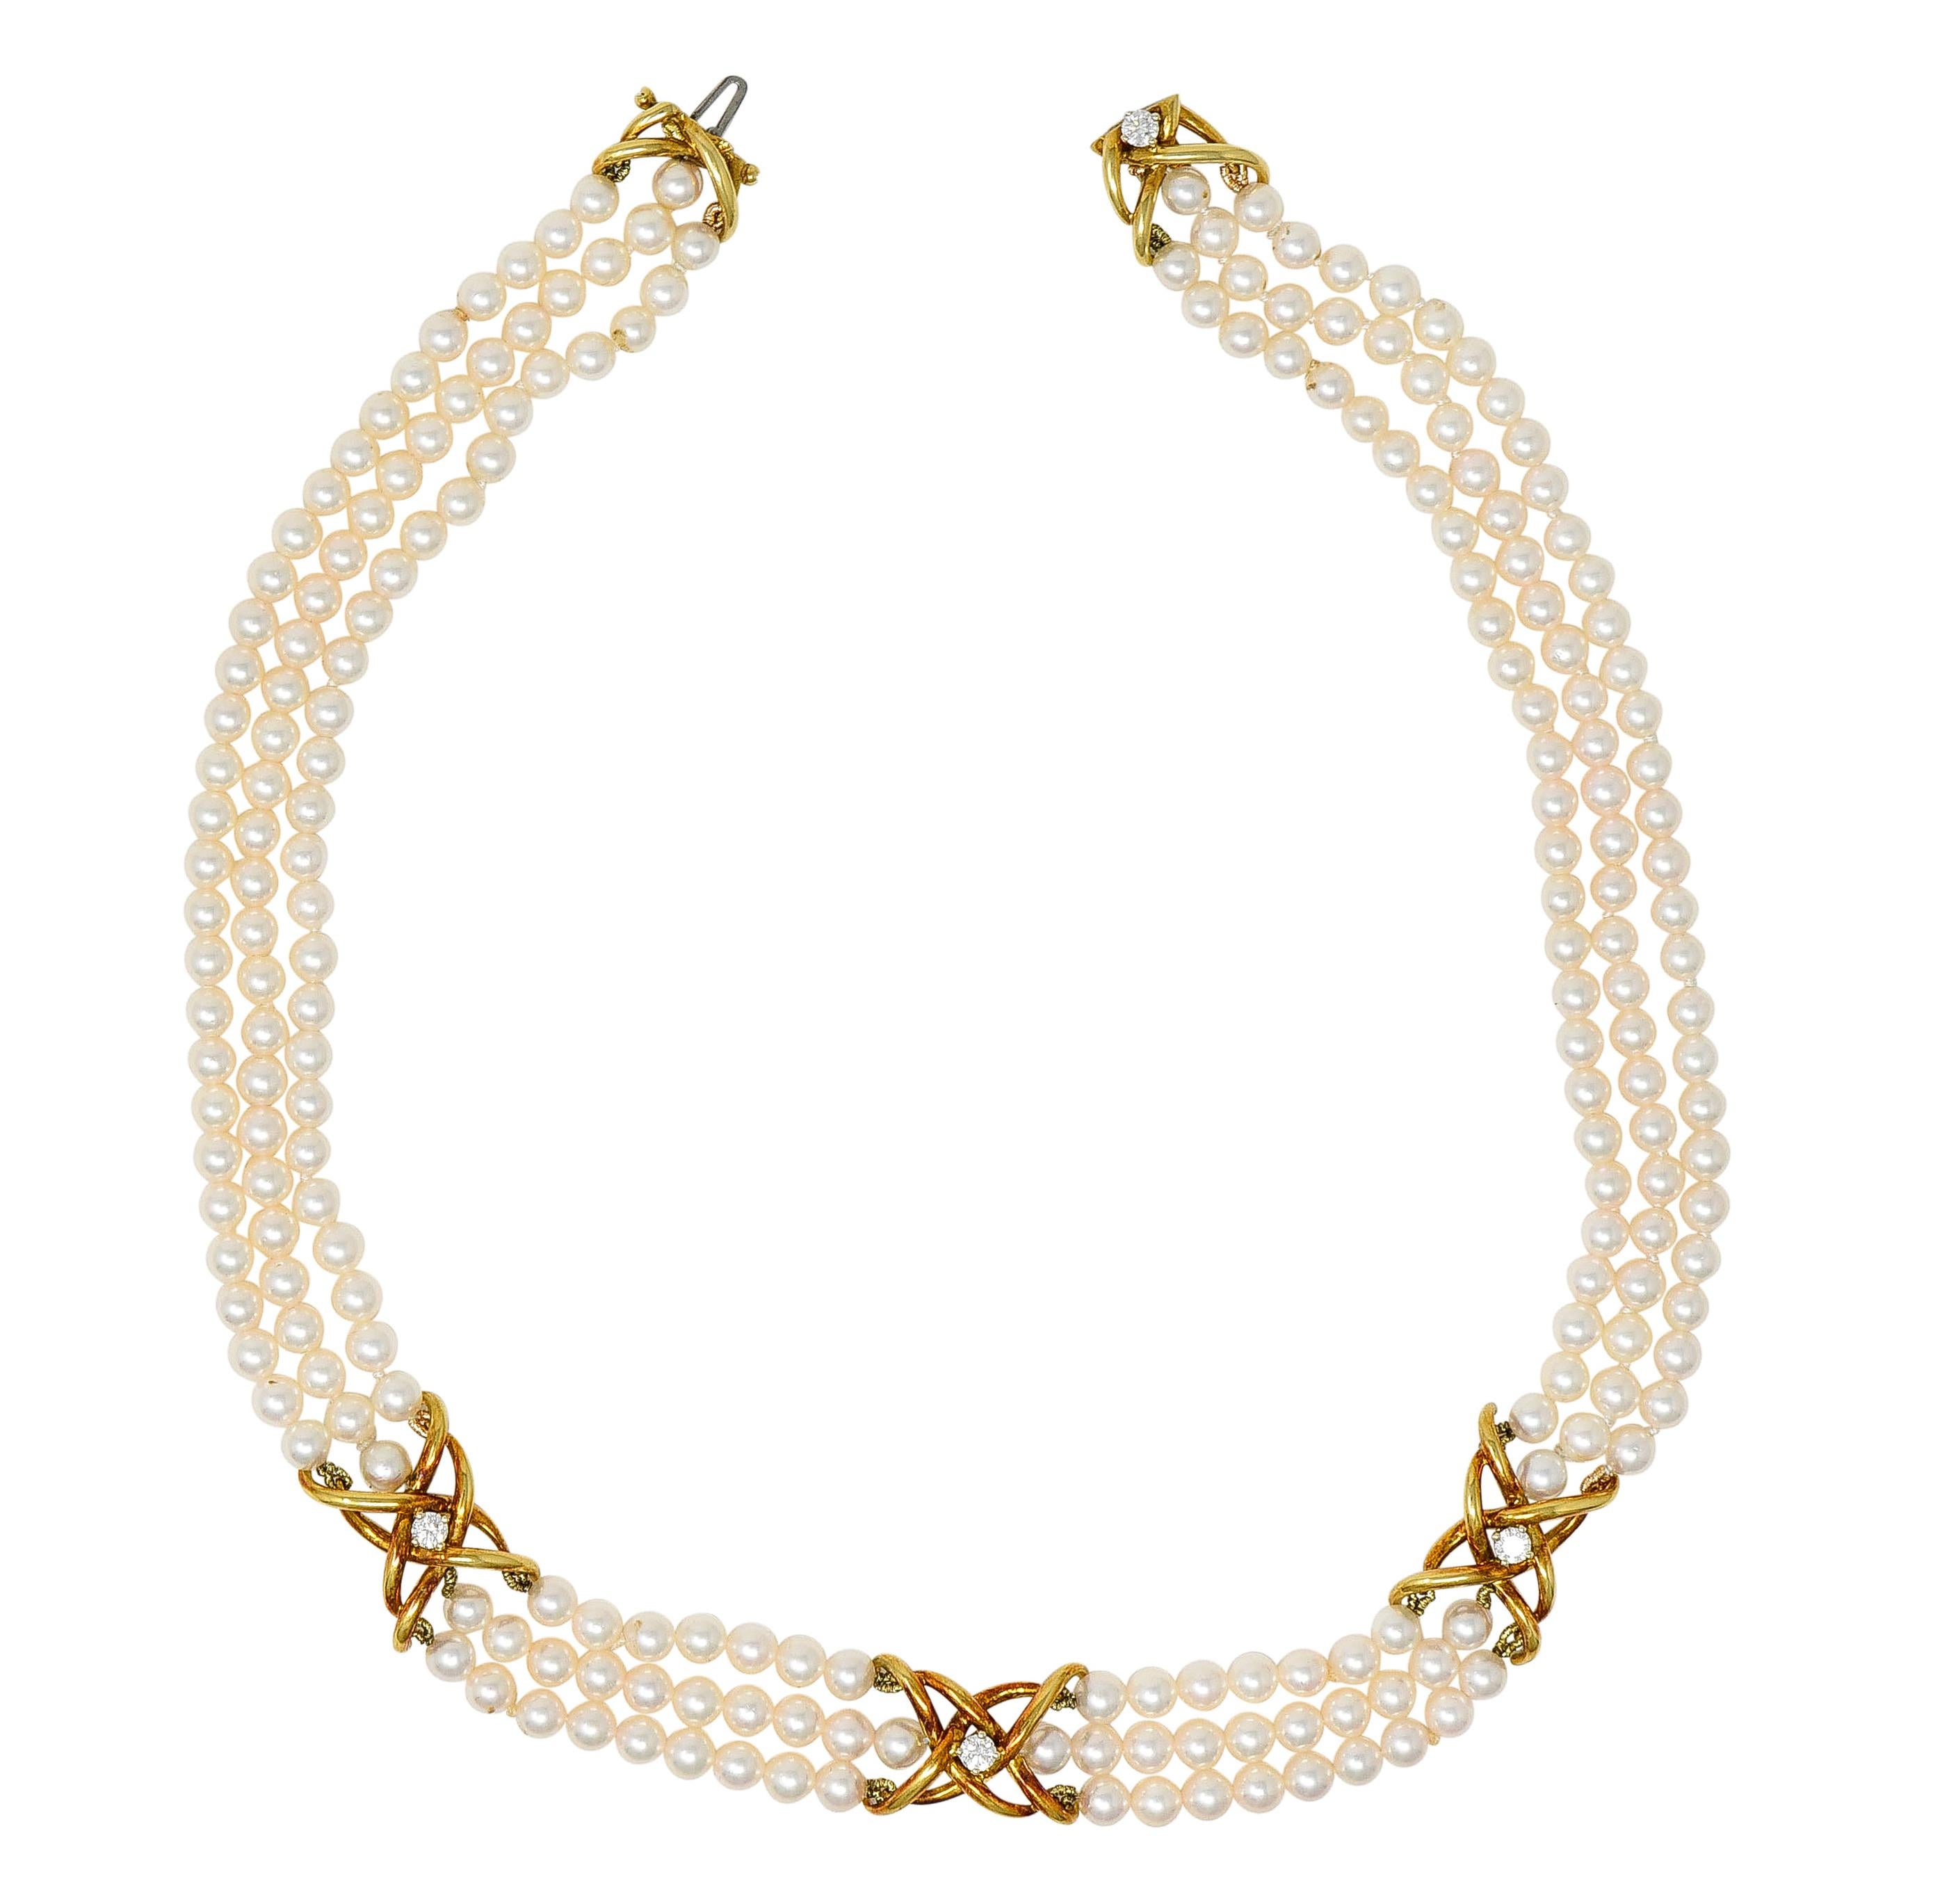 Collar necklace is comprised of three swagged pearl strands
Measuring approximately 4.7 mm  on average with very good luster throughout
Well matched in white body color with moderate to strong rosè overtones
Cinched by four crossed X's that each